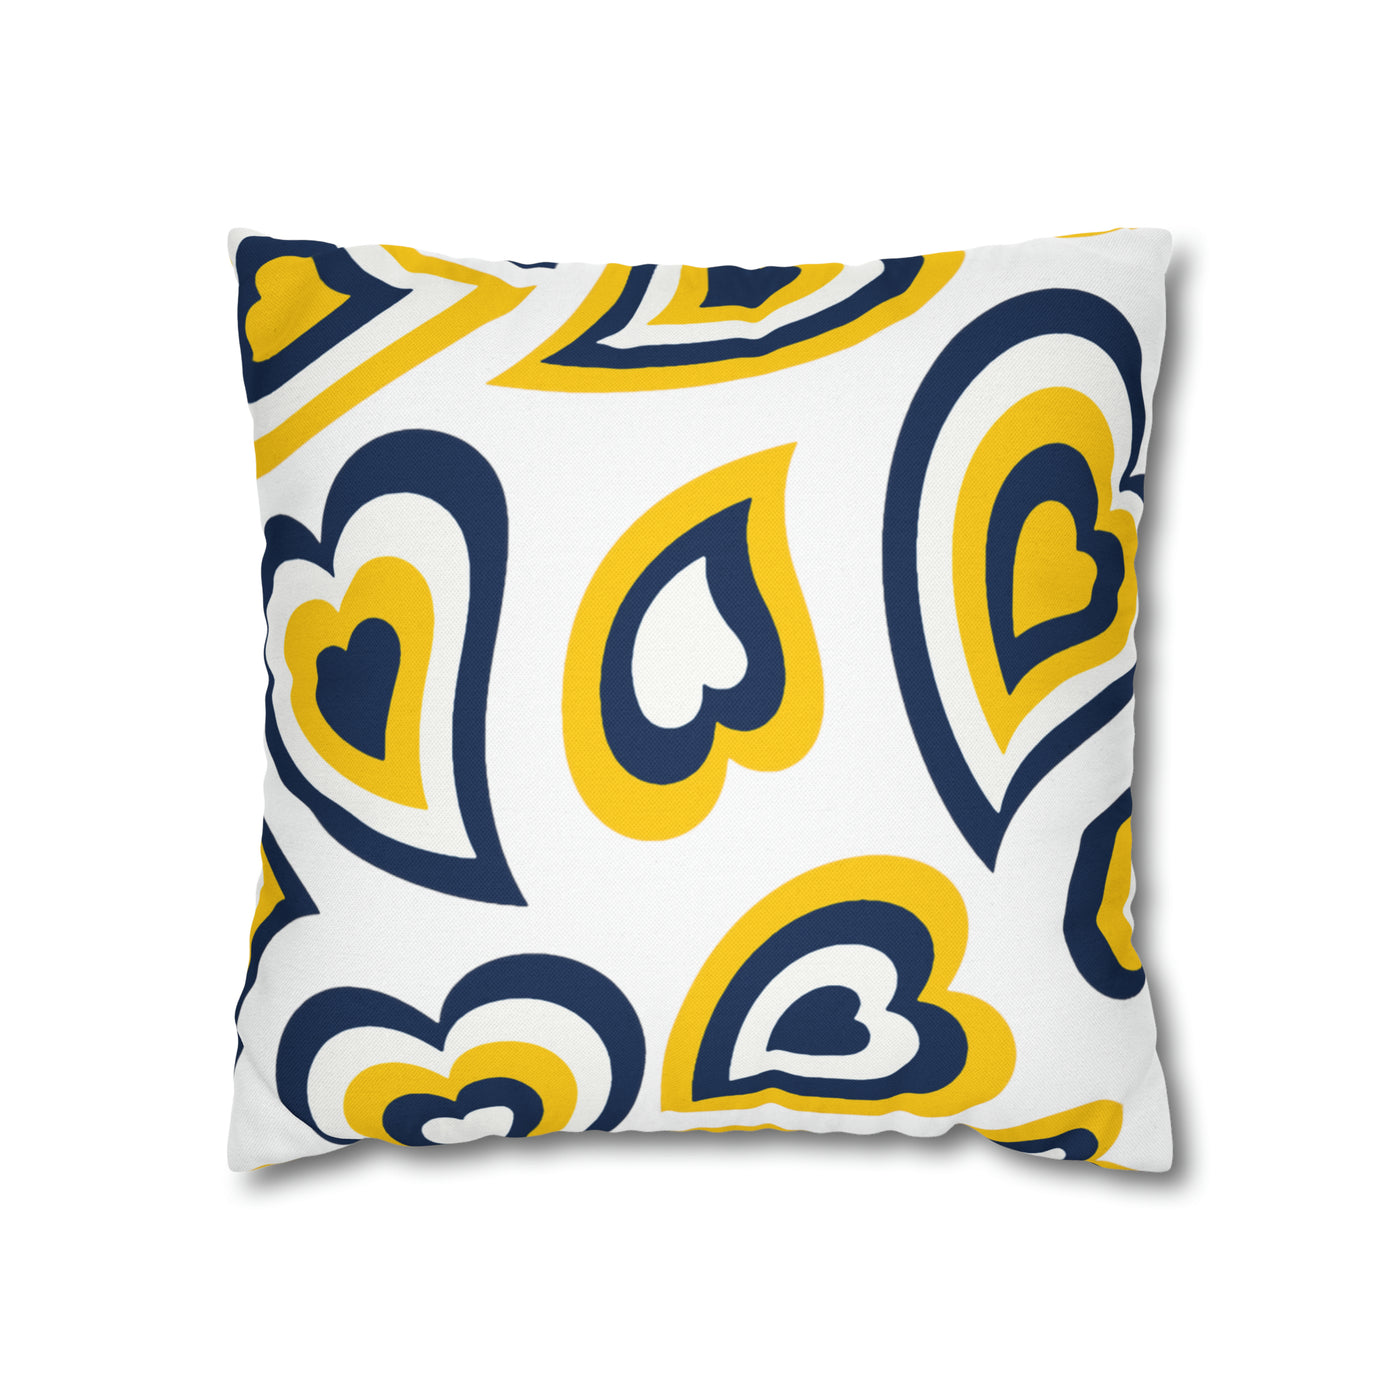 Retro Heart Pillow - Navy and Maize, Heart Pillow, Hearts, Valentine's Day, Michigan, Bed Party Pillow, Sleepaway Camp Pillow,Camp